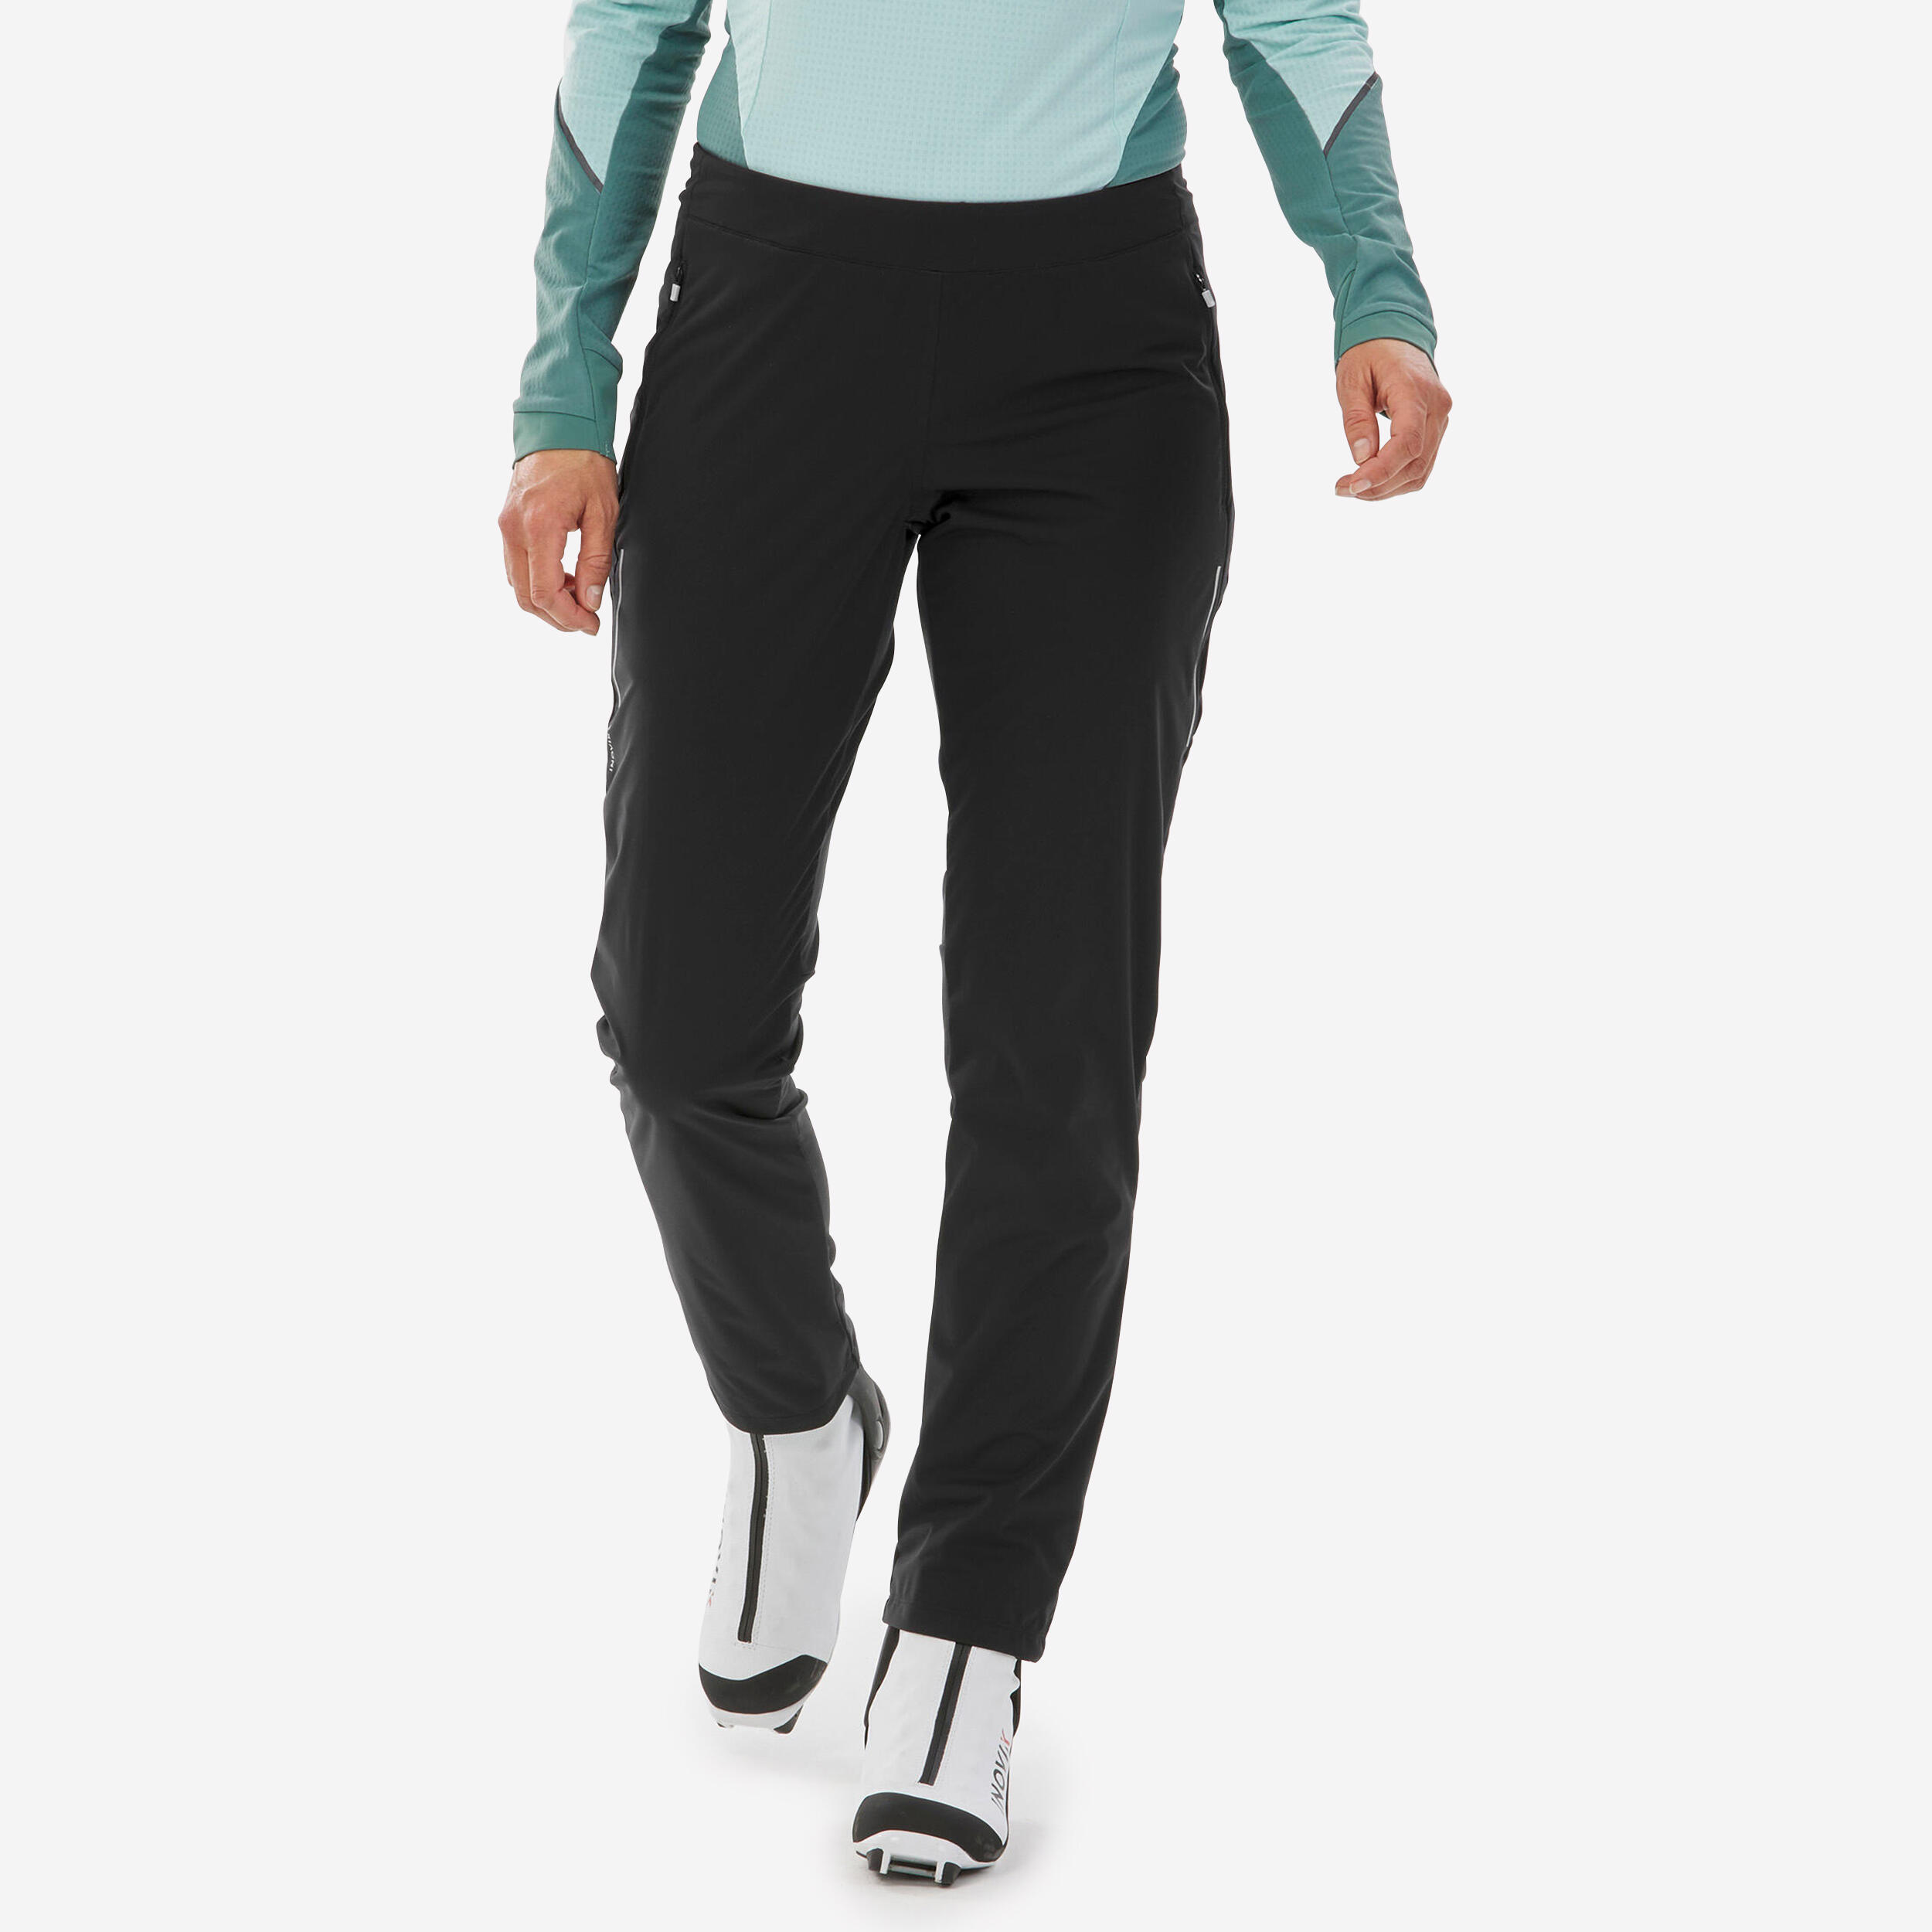 Women's Cross-country Skiing Trousers XC S Pant 500 1/9